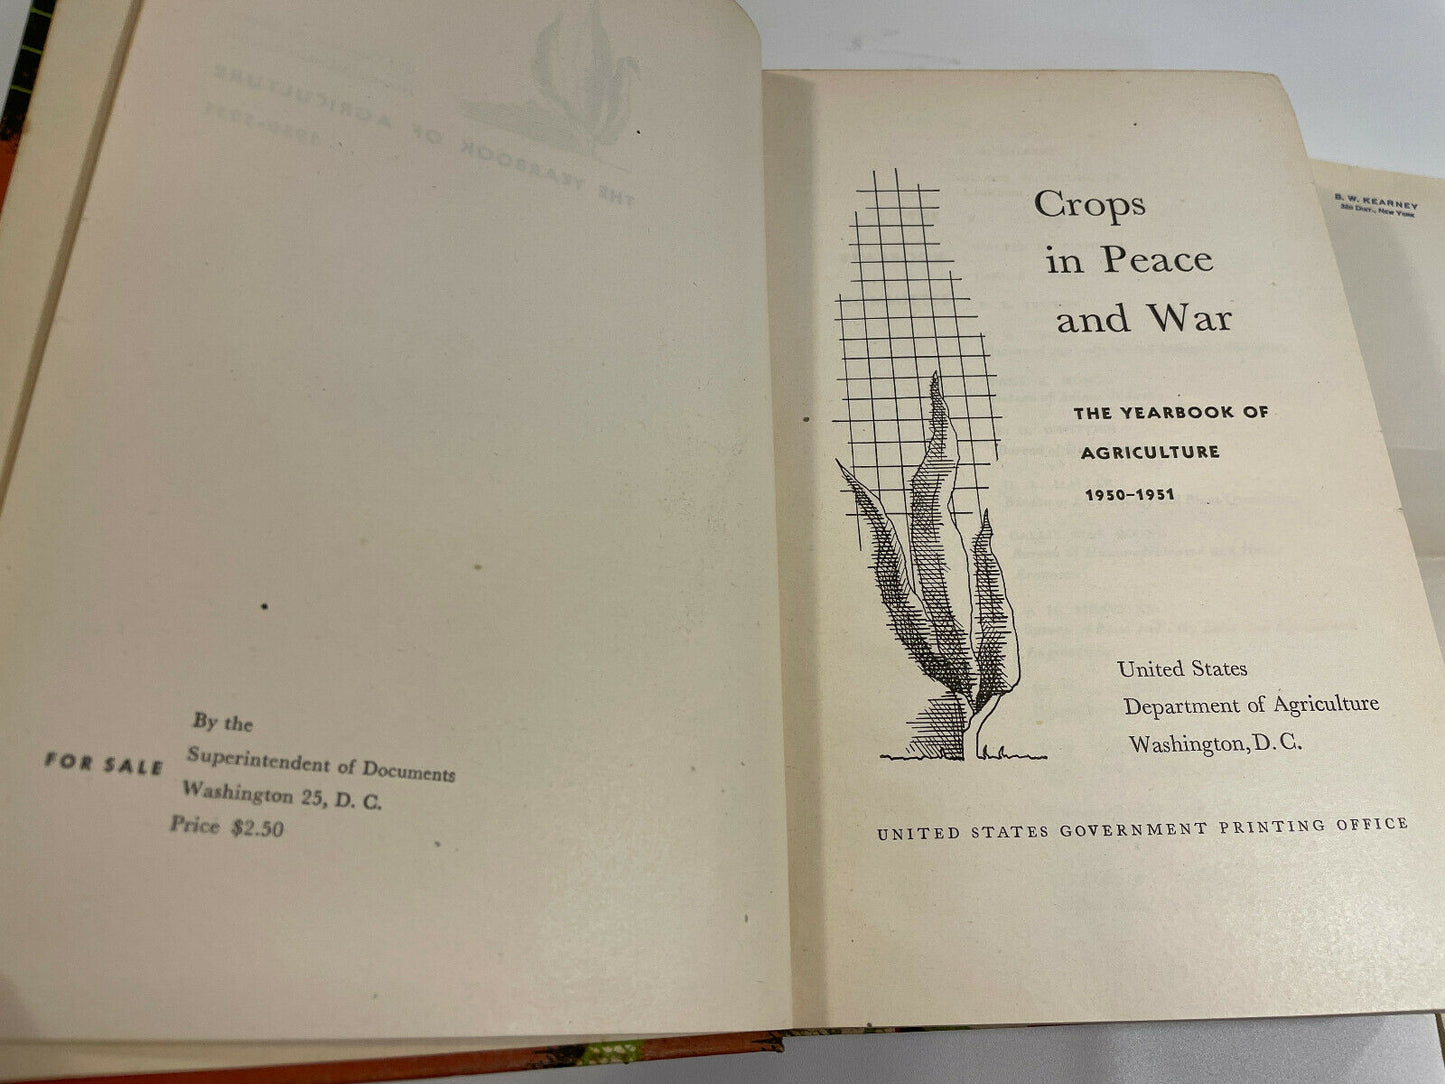 Crops In Peace and War: Yearbook of Agriculture 1950-1951